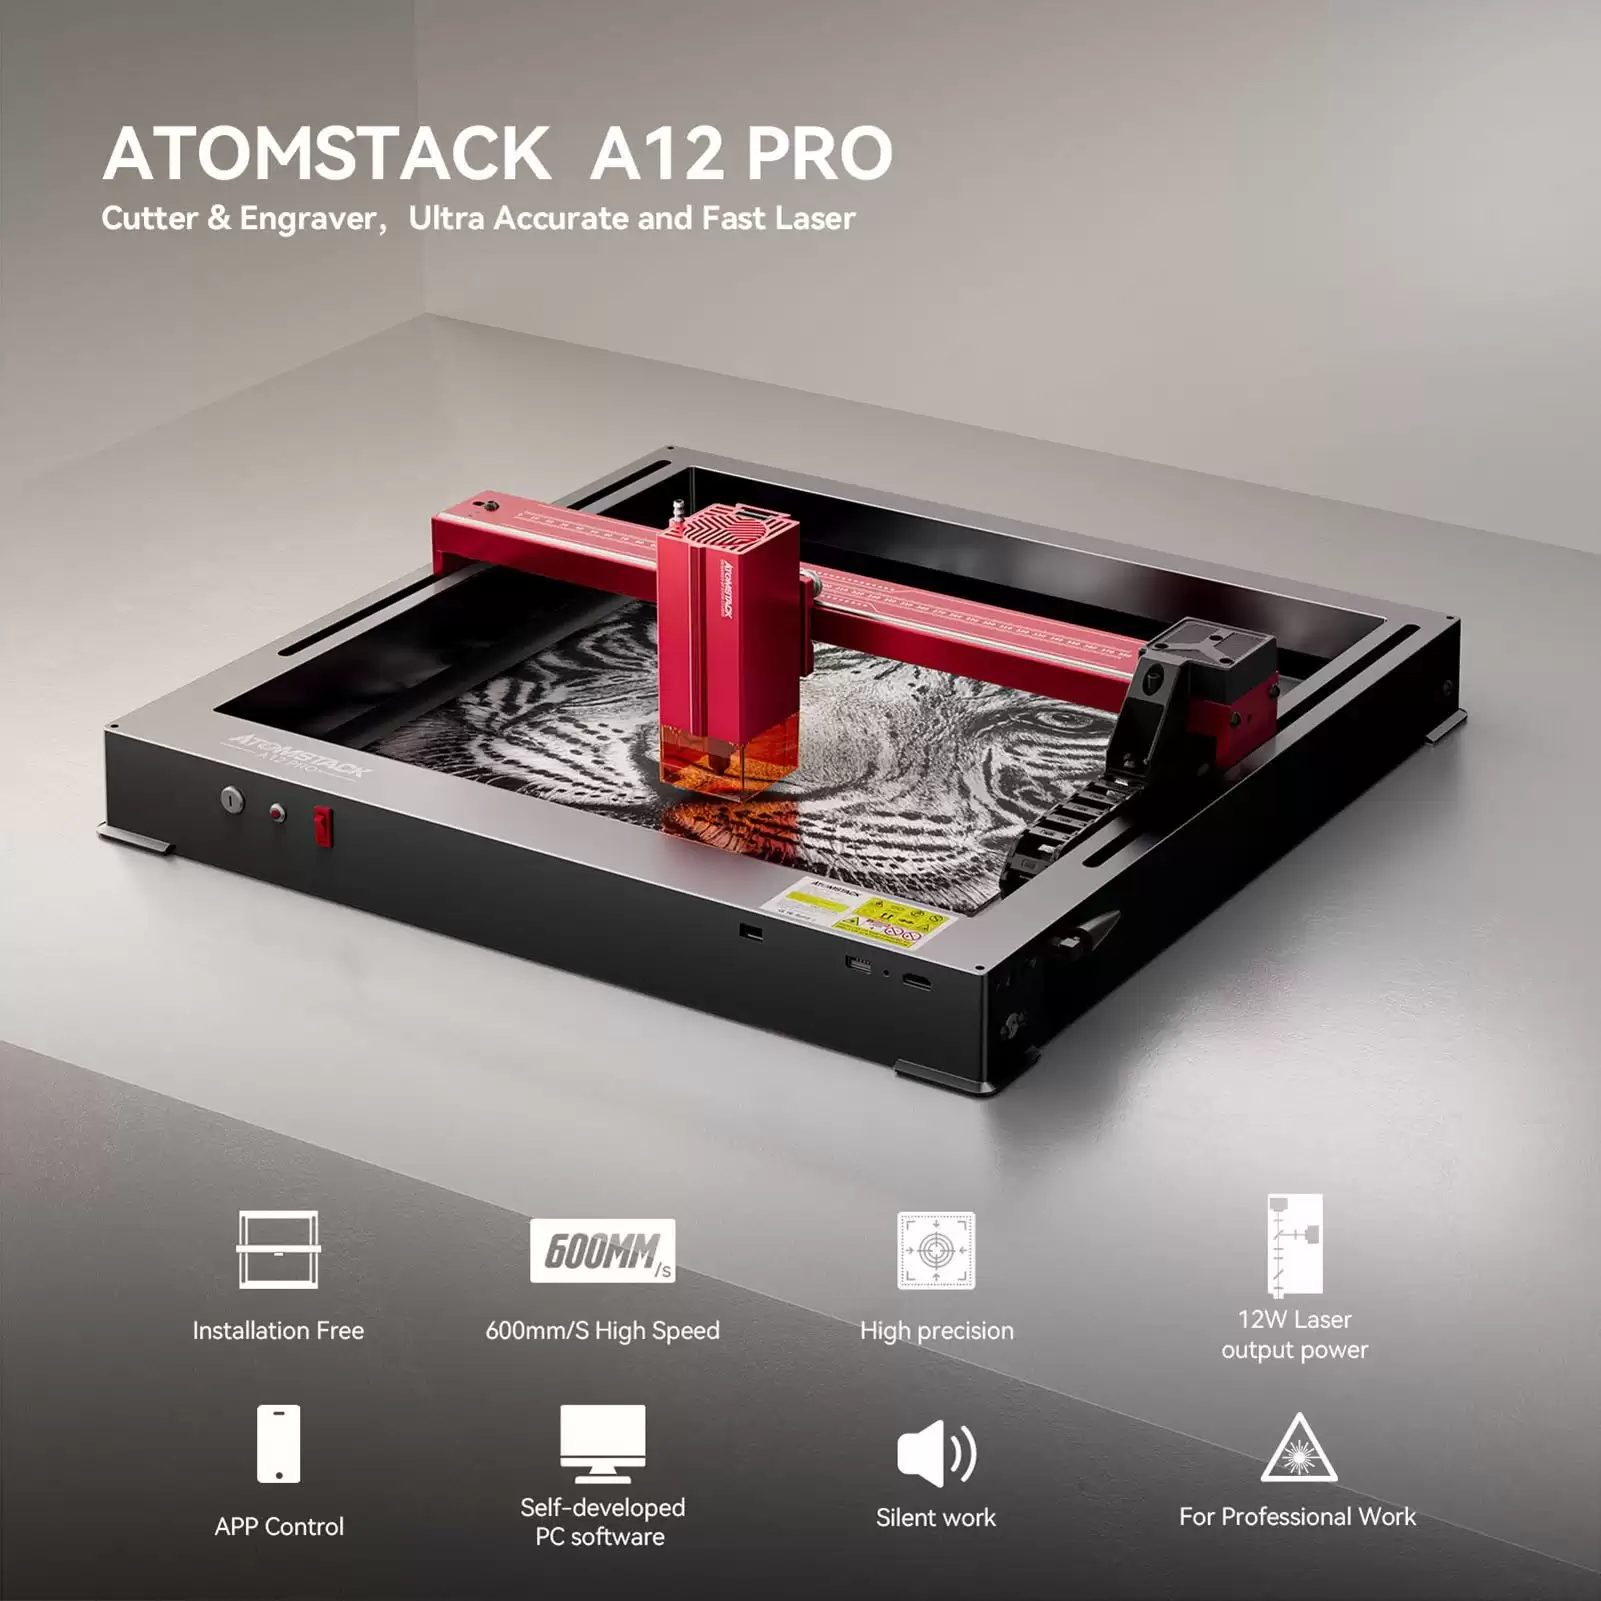 Pay Only $349 For Atomstack A12 Pro 12w Integrated Frame Laser Engraver + Free Shipping With This Discount Coupon At Cafago